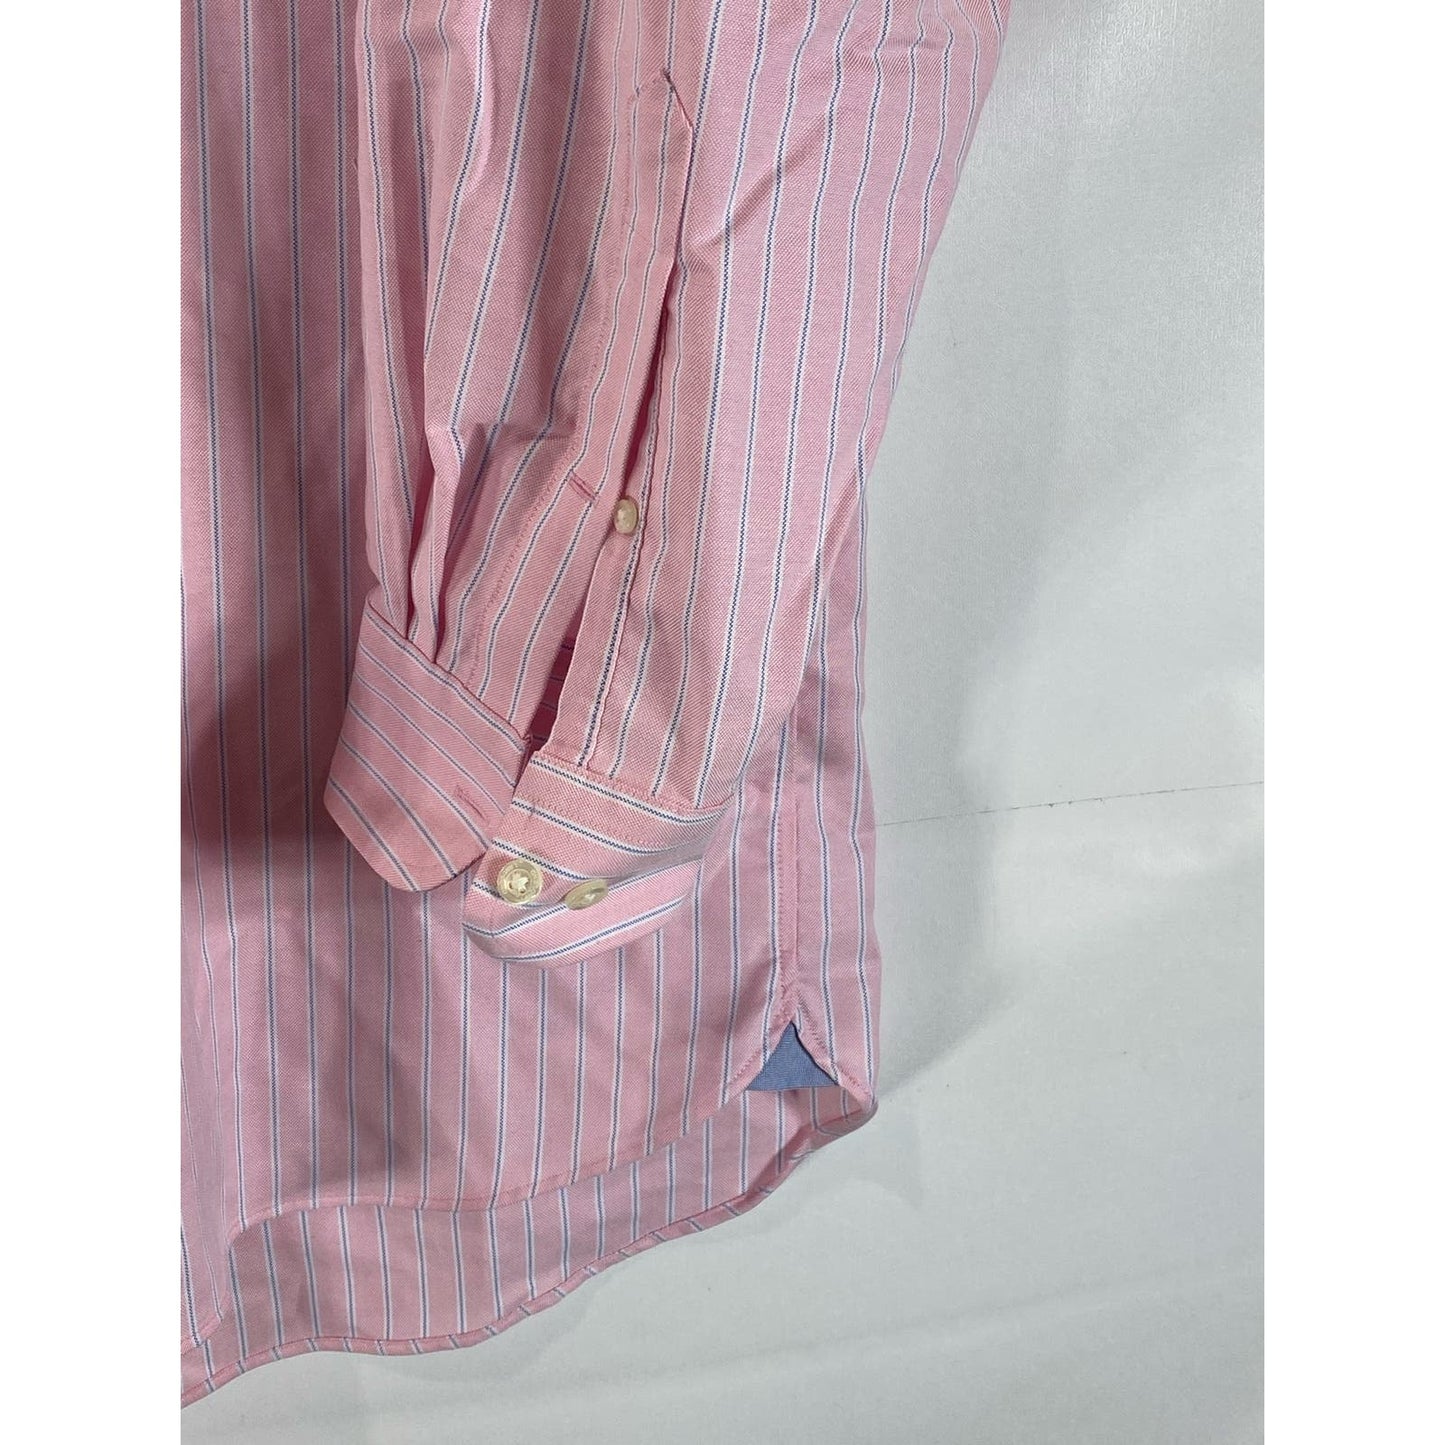 LANDS' END Men's Pink Striped Traditional-Fit No Iron Oxford Shirt SZ 17.5-34